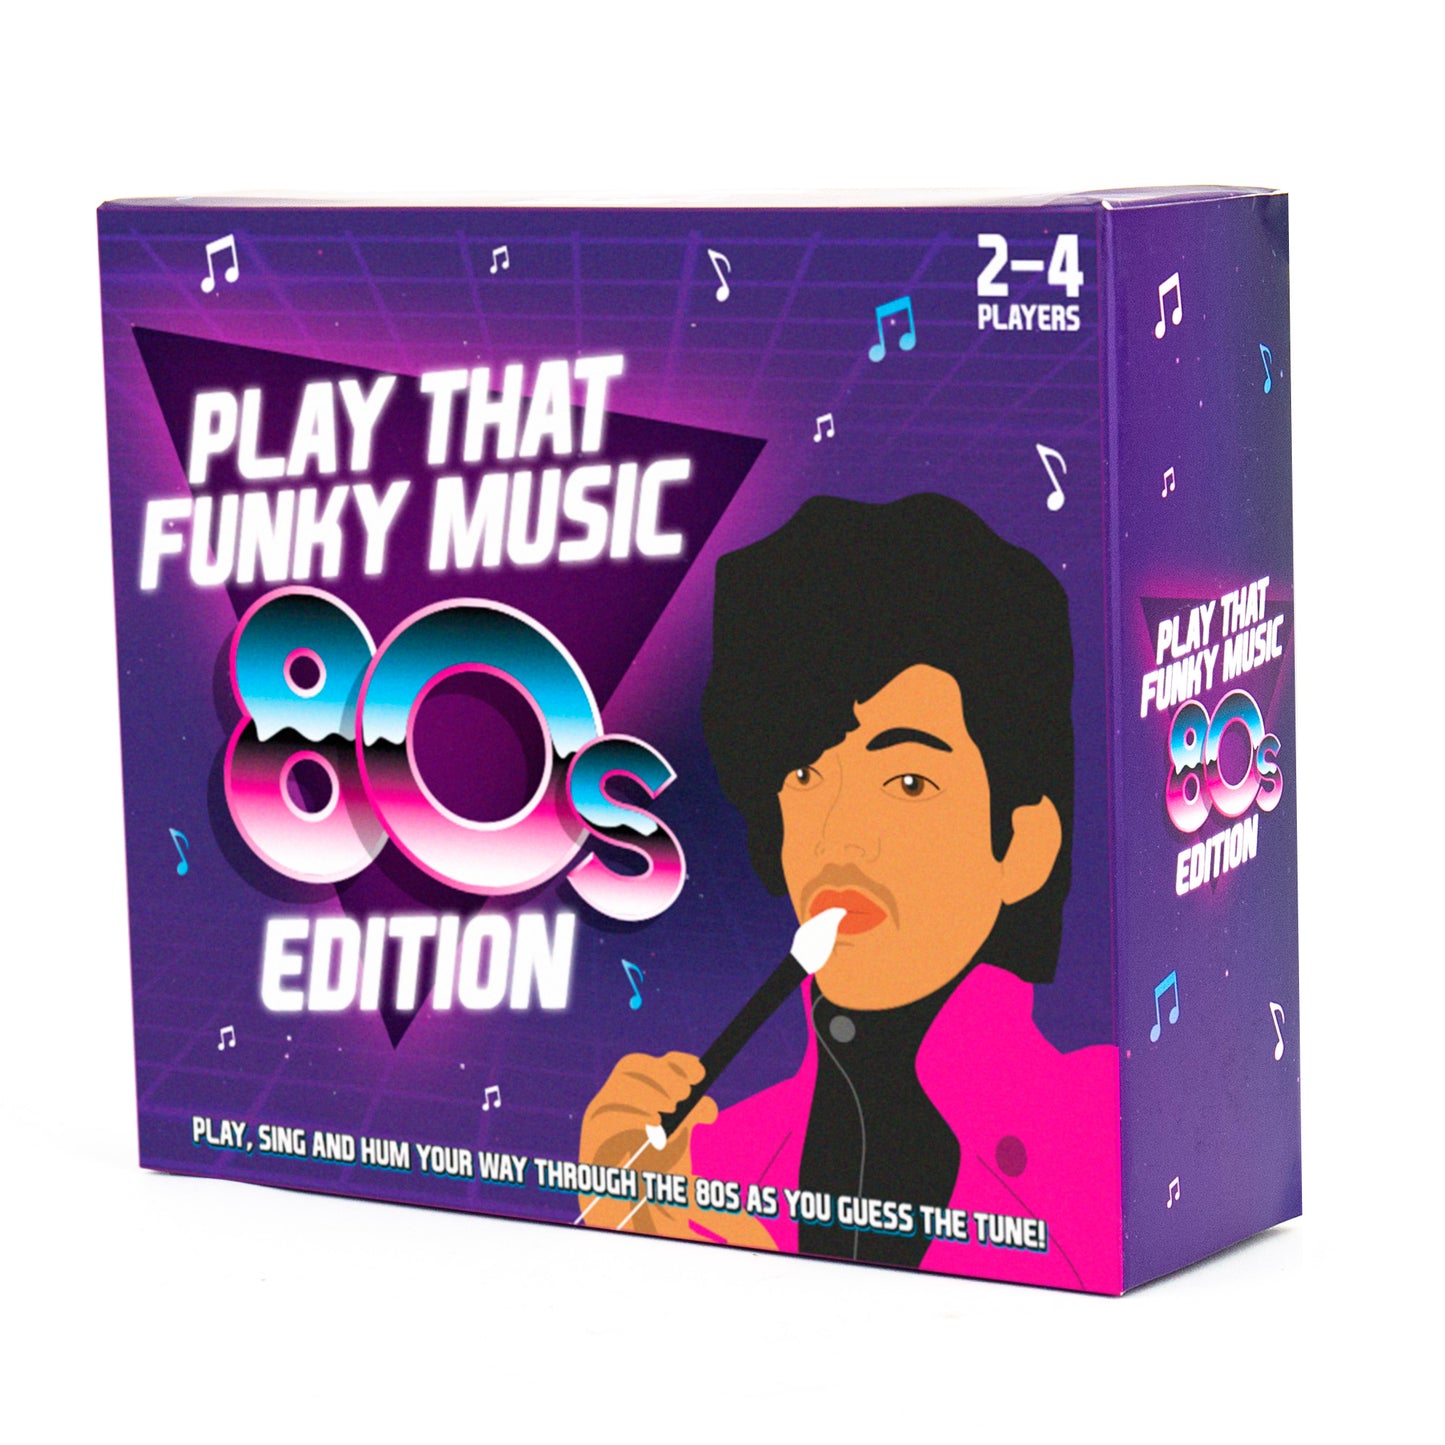 Spel Play That Funky Music 80s Edition - Gift Republic